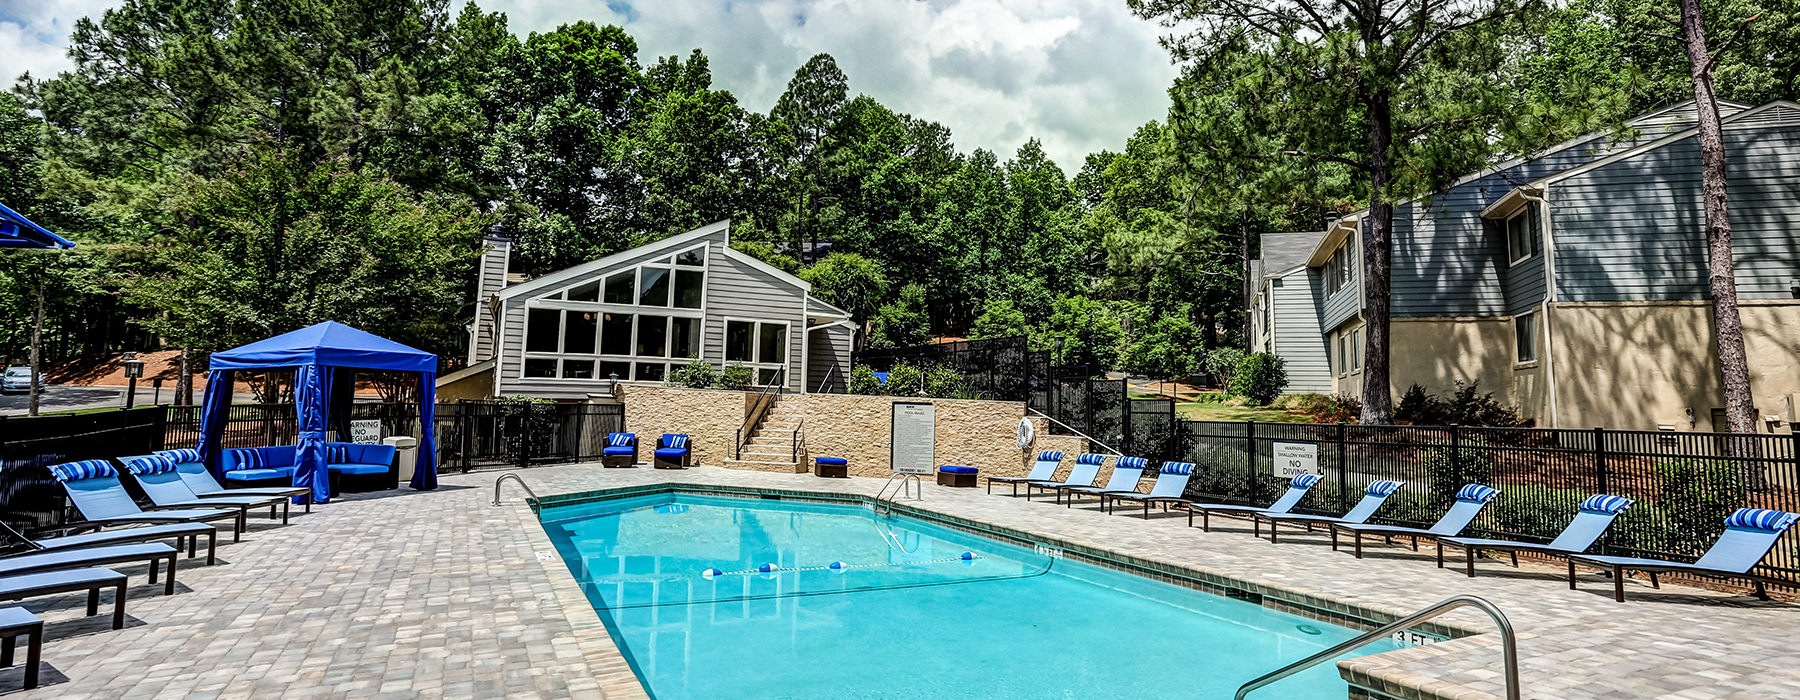 Poolside chaise lounge and cabana on sundeck at 700 Riverchase Apartments in Hoover, AL